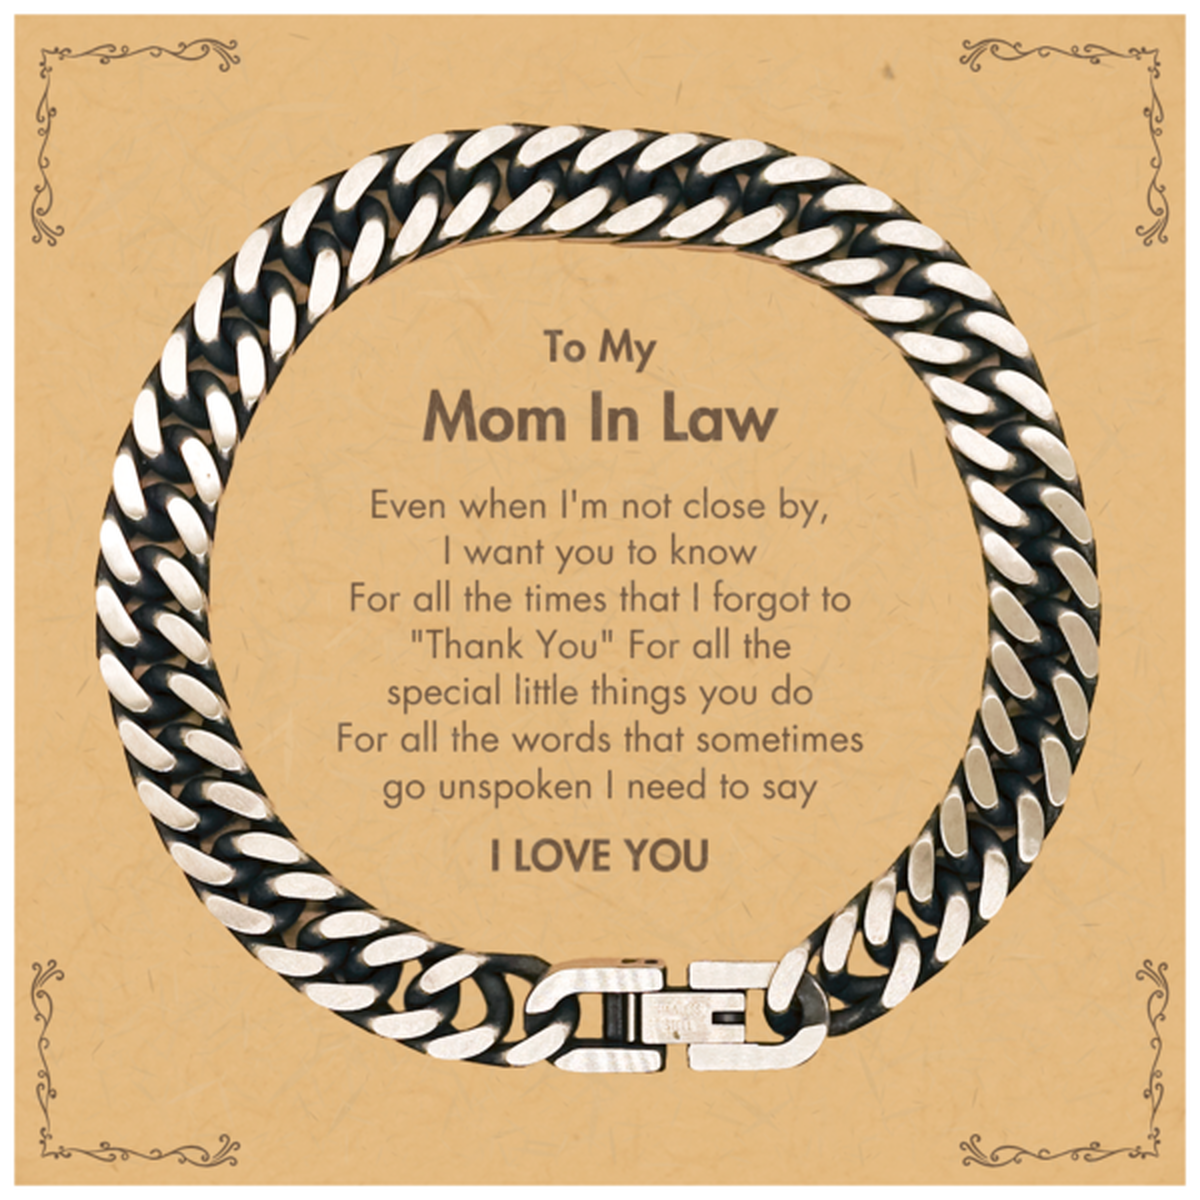 Thank You Gifts for Mom In Law, Keepsake Cuban Link Chain Bracelet Gifts for Mom In Law Birthday Mother's day Father's Day Mom In Law For all the words That sometimes go unspoken I need to say I LOVE YOU